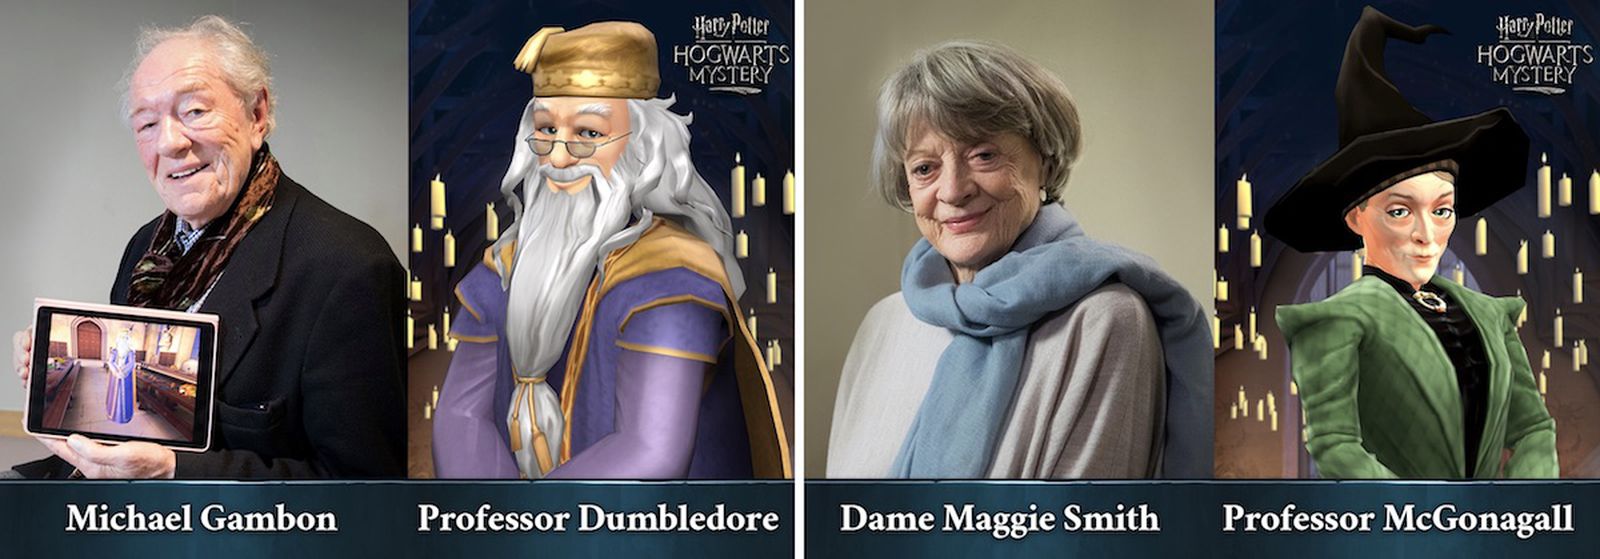 harry potter characters in hogwarts legacy